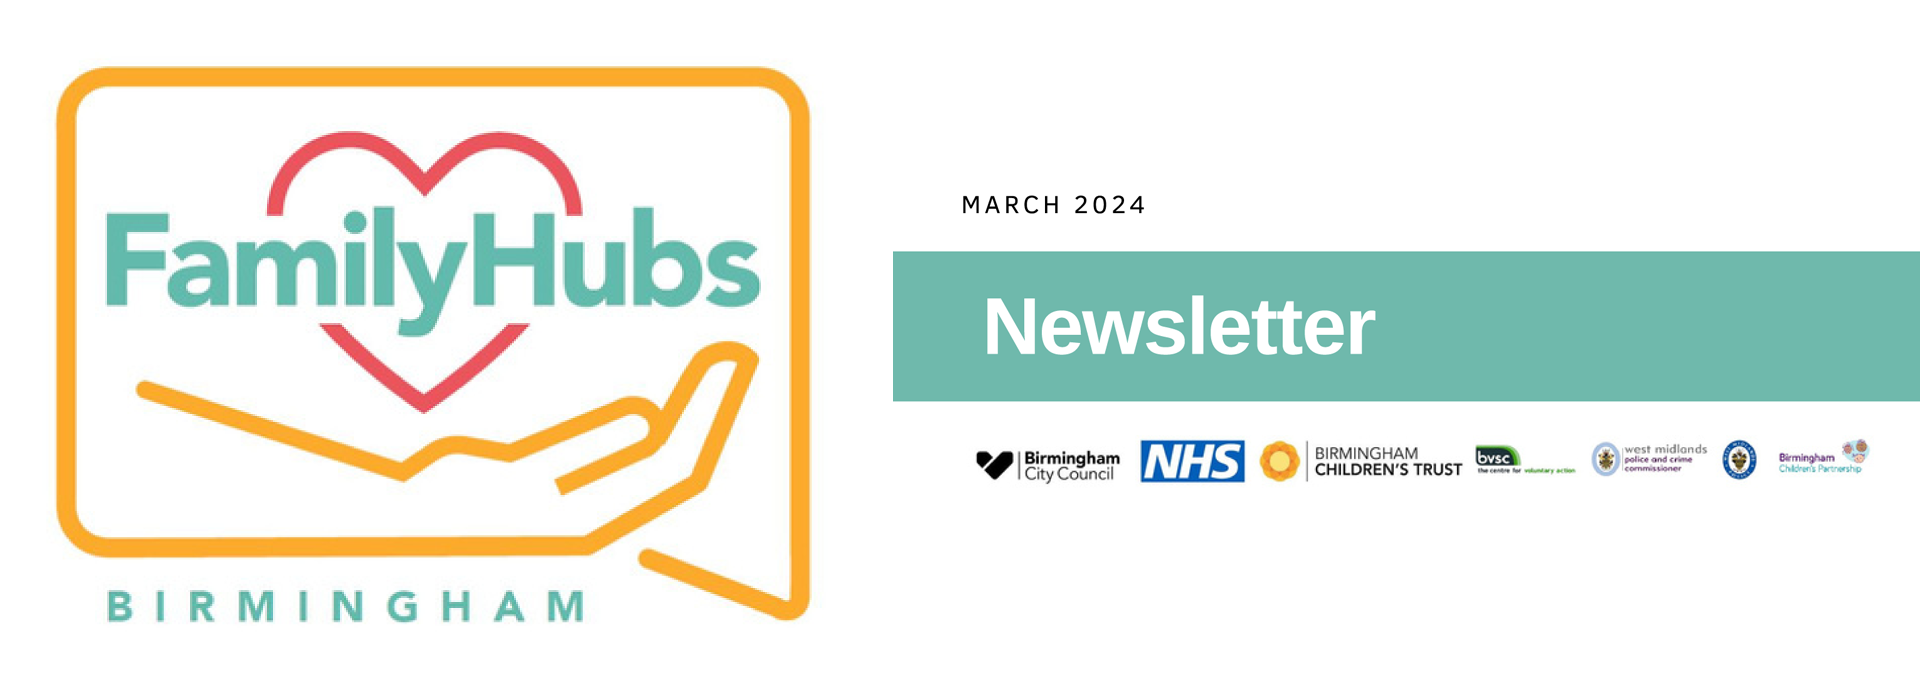 FamilyHubs Newsletter – March 2024